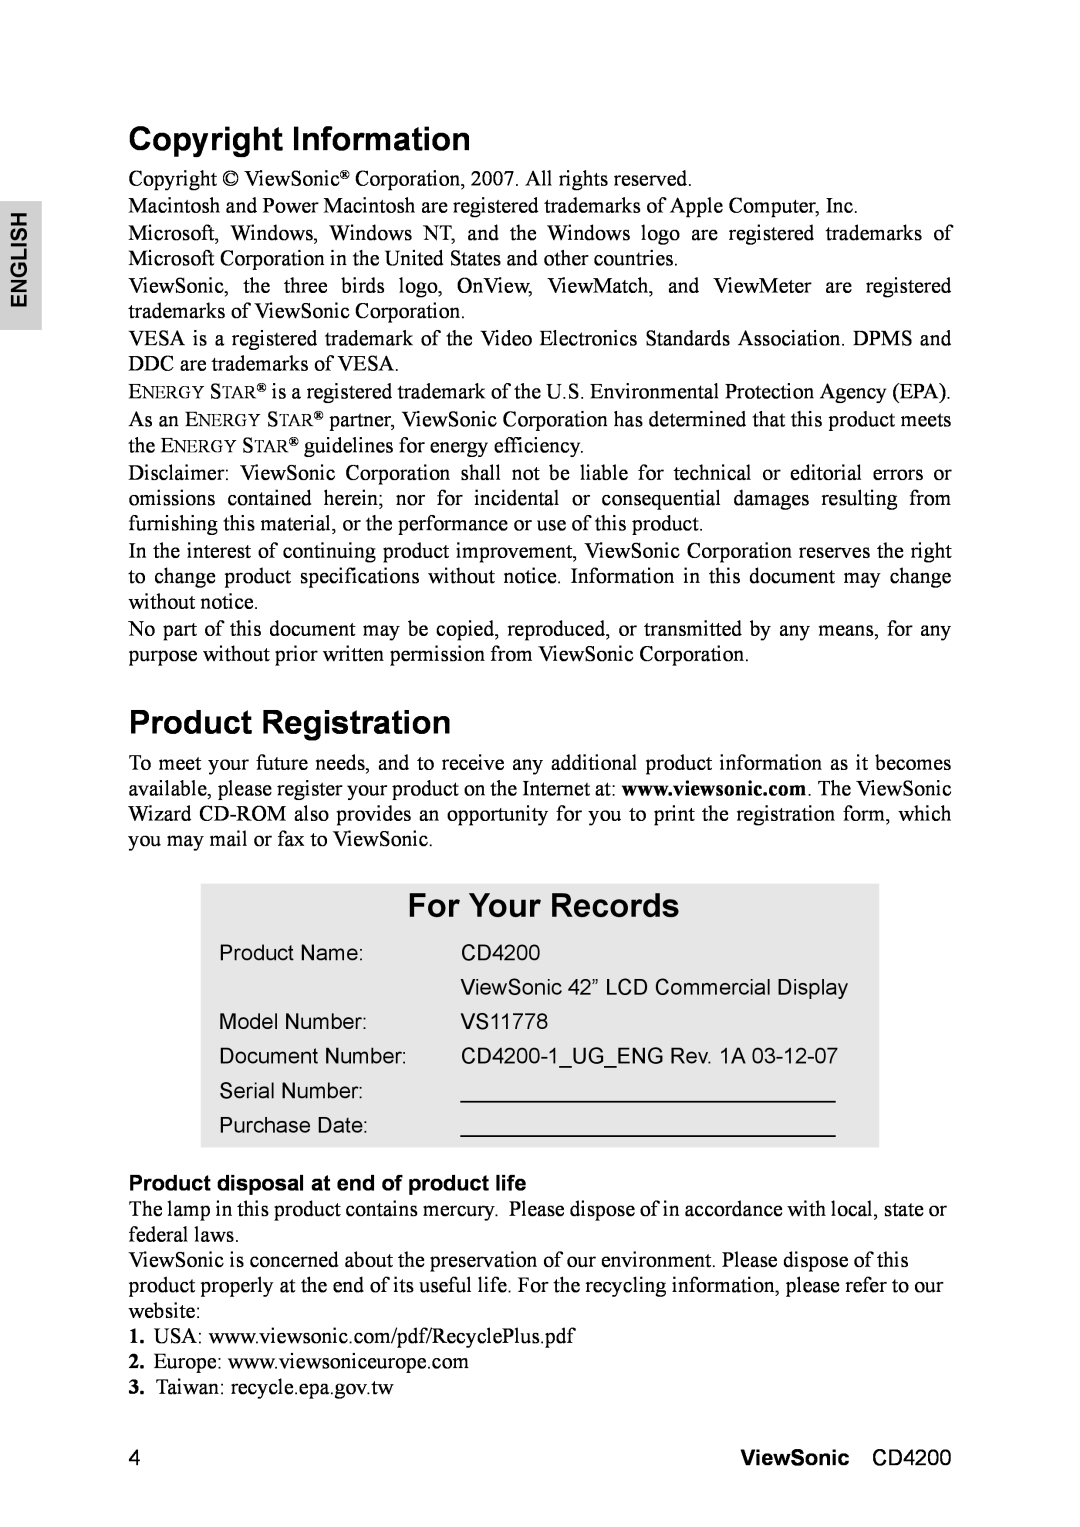 ViewSonic CD4200 Copyright Information, Product Registration, For Your Records, Product disposal at end of product life 